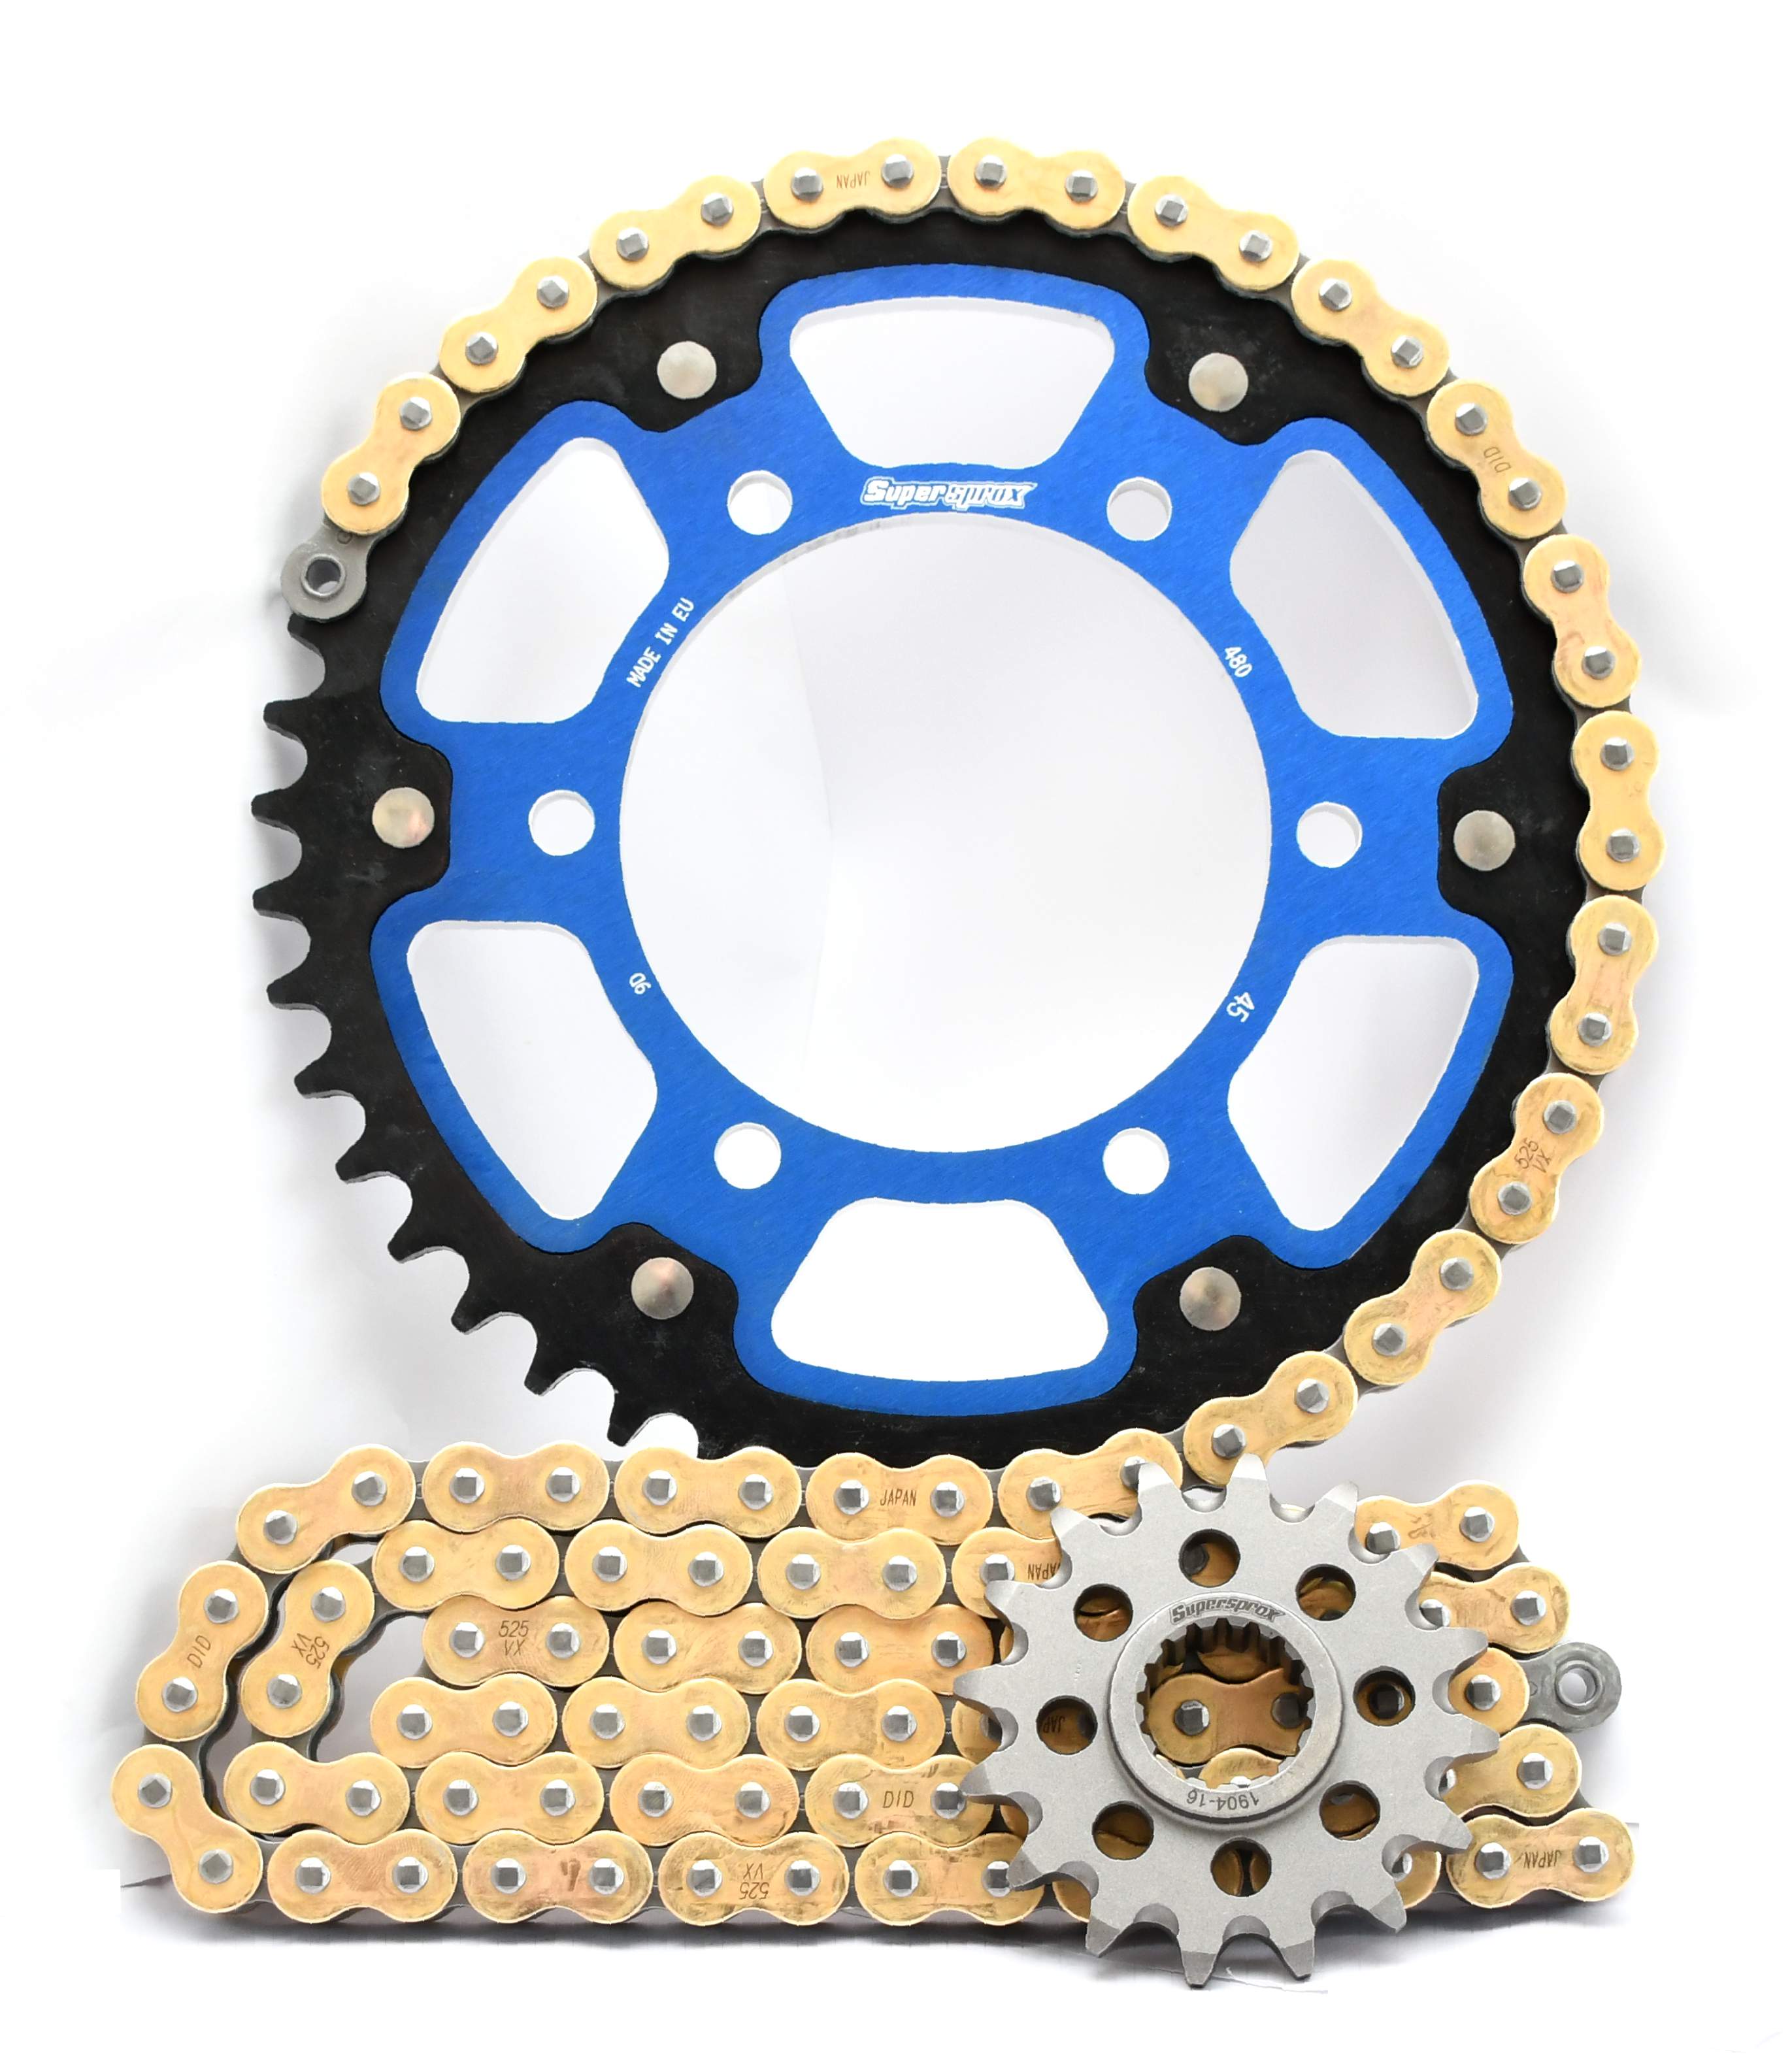 Supersprox Chain & Sprocket Kit for Yamaha MT-09 Tracer (Inc GT) 18-20 - Standard Gearing - 0